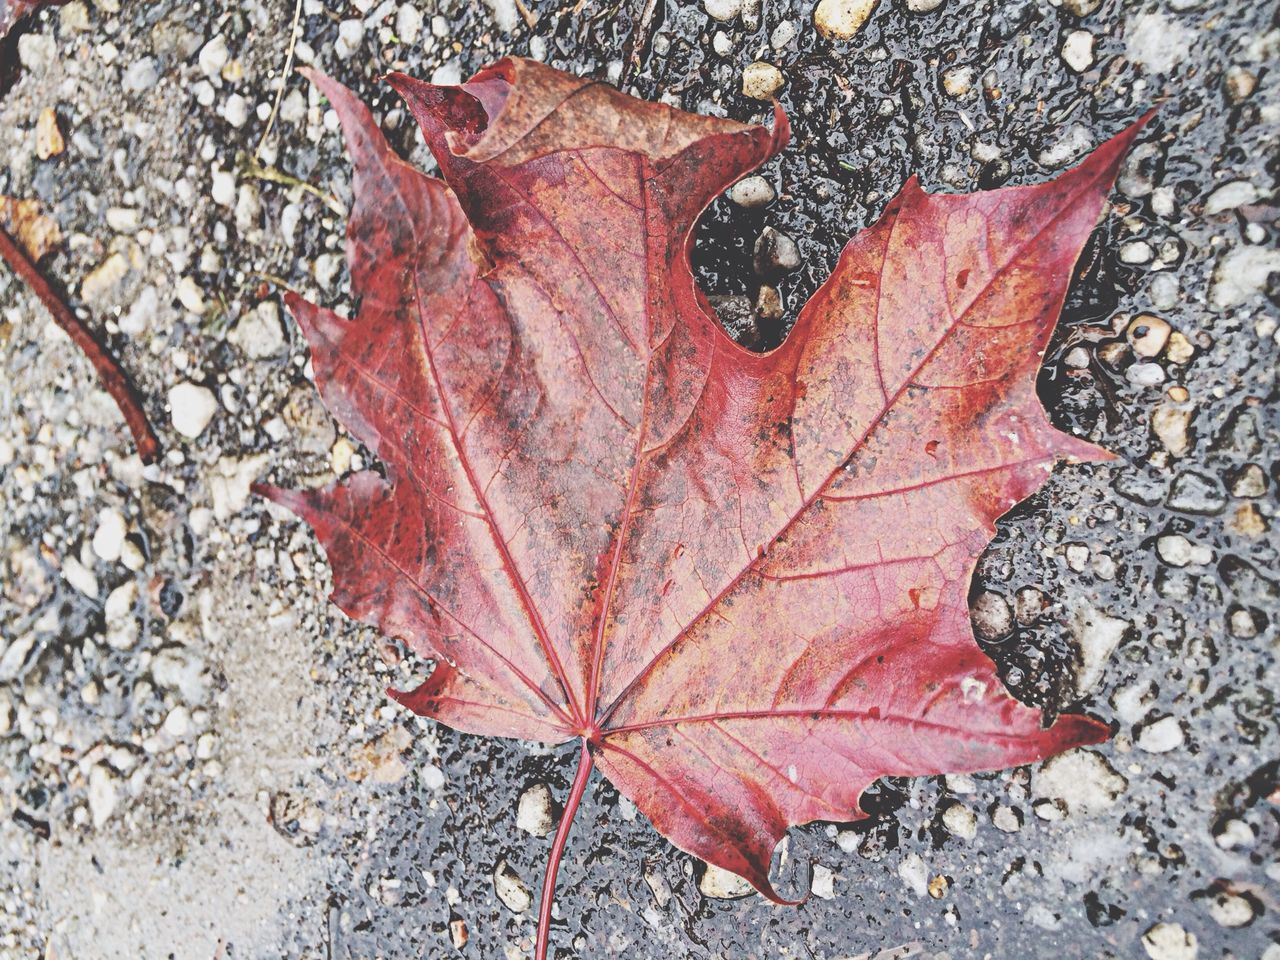 autumn, leaf, change, season, leaf vein, maple leaf, dry, natural pattern, close-up, red, nature, leaves, natural condition, textured, fallen, day, aging process, outdoors, fragility, pattern